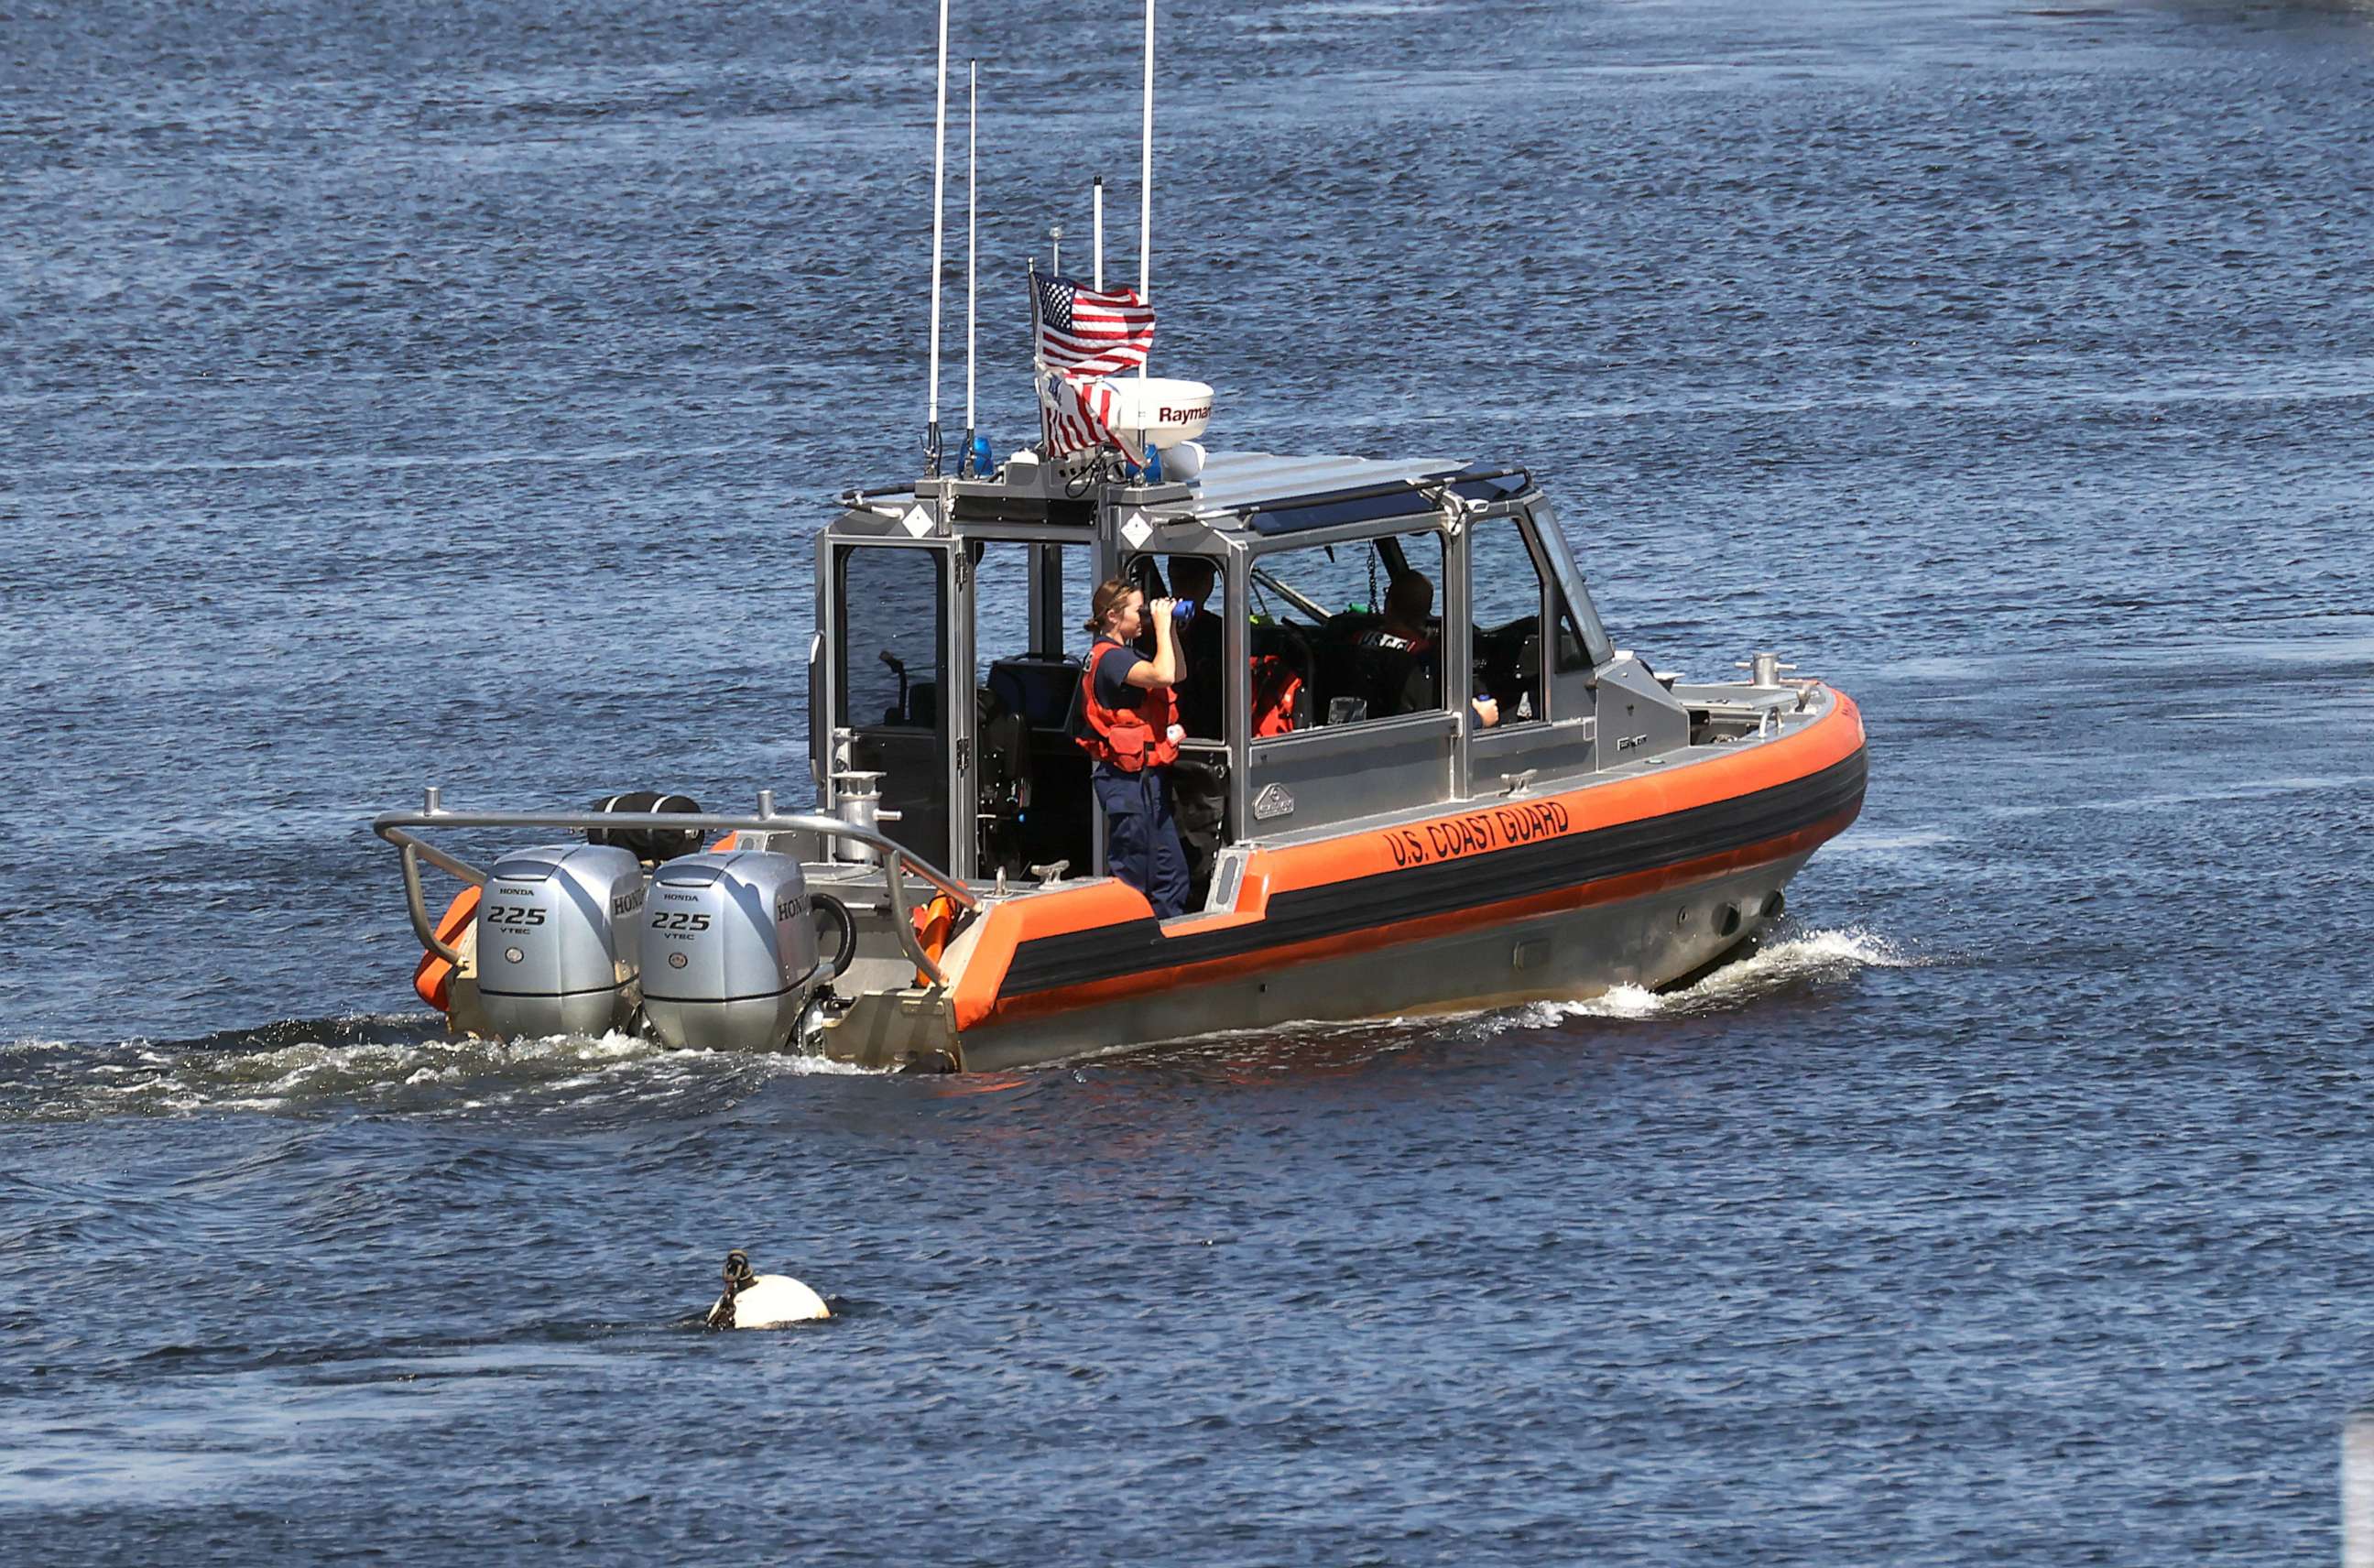 PHOTO: File photo of a United States Coast Guard boat during a search in Merrimack River in Amesbury, Mass., on June 10, 2022.